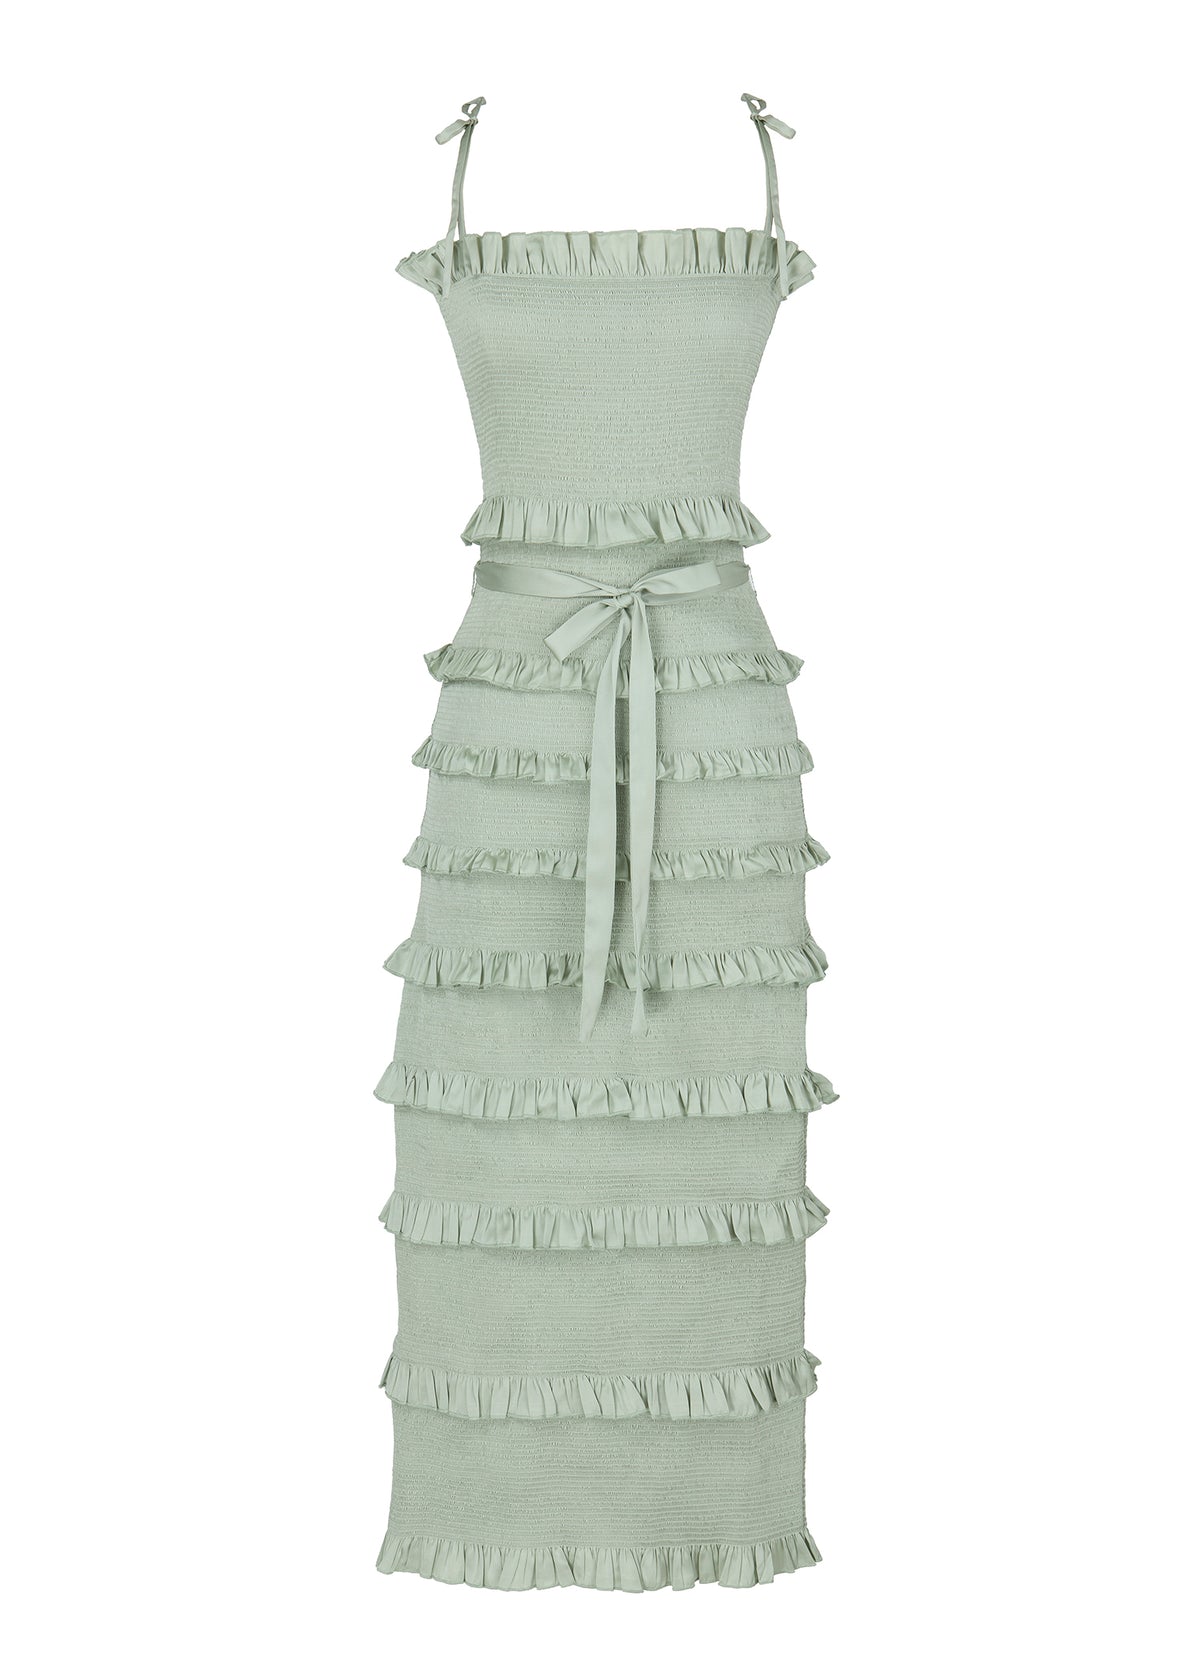 The Lily Dress in Sage